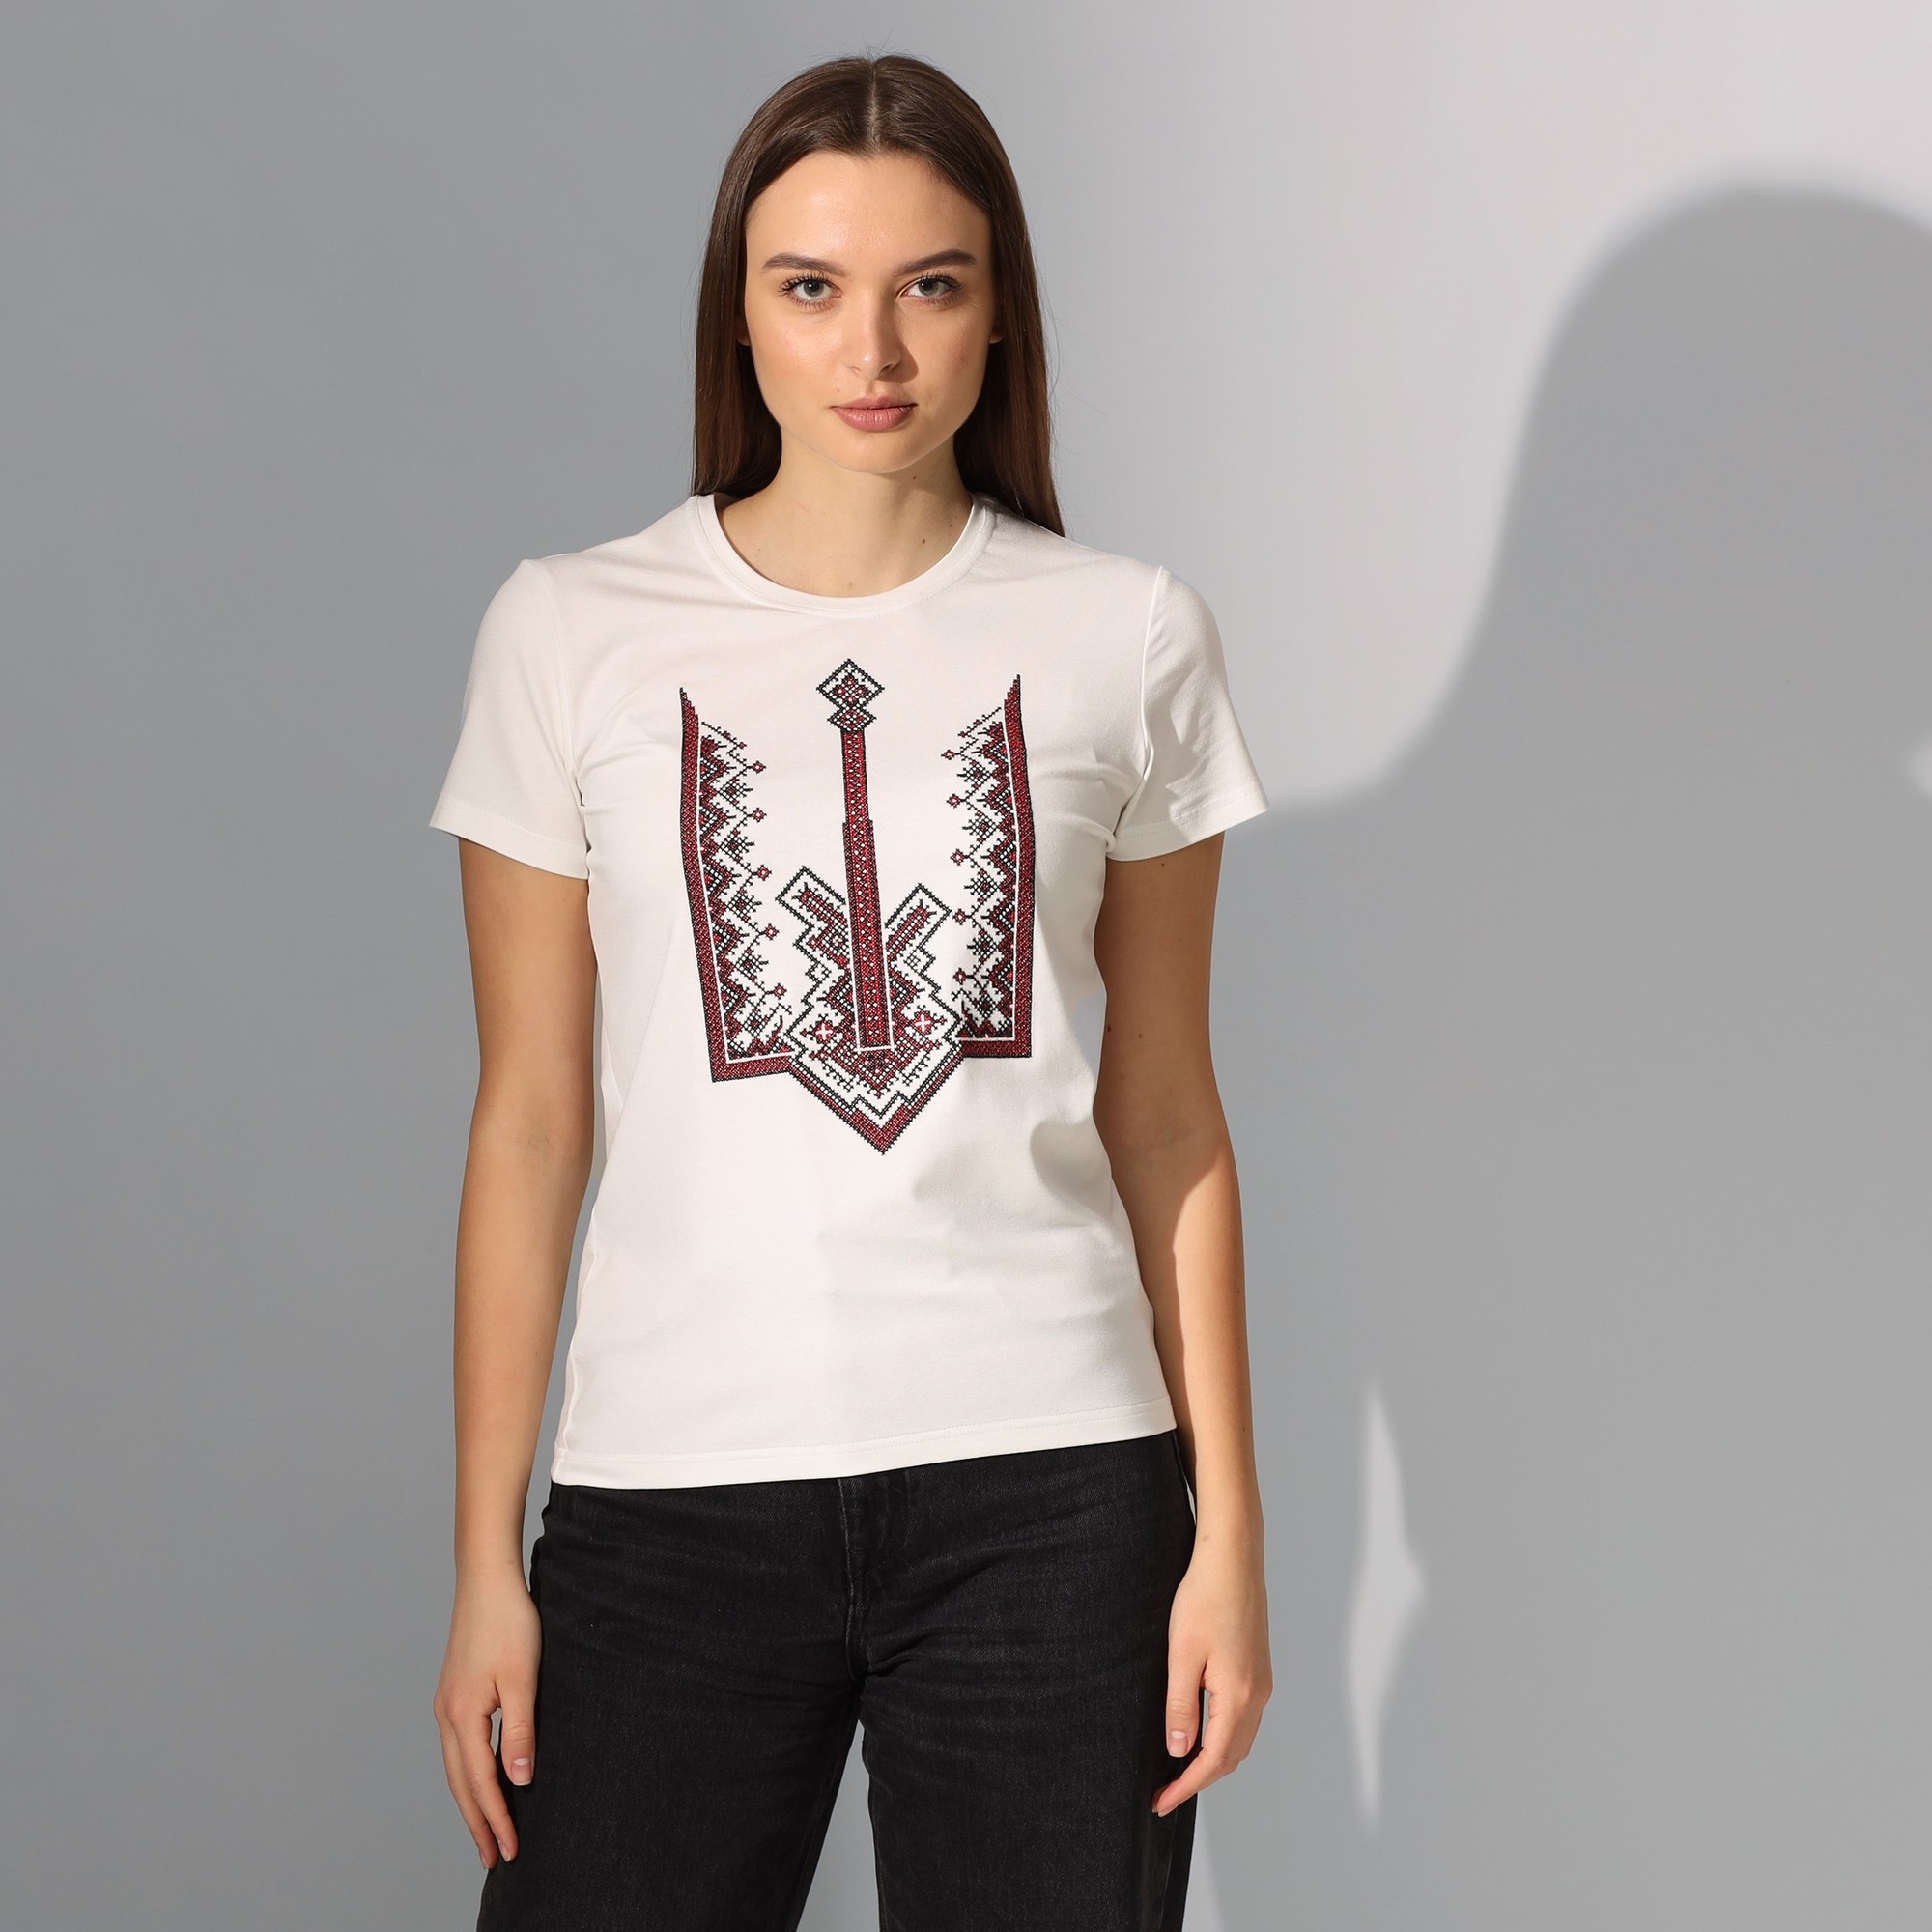 T-shirt with embroidery - "Trident with a cross"